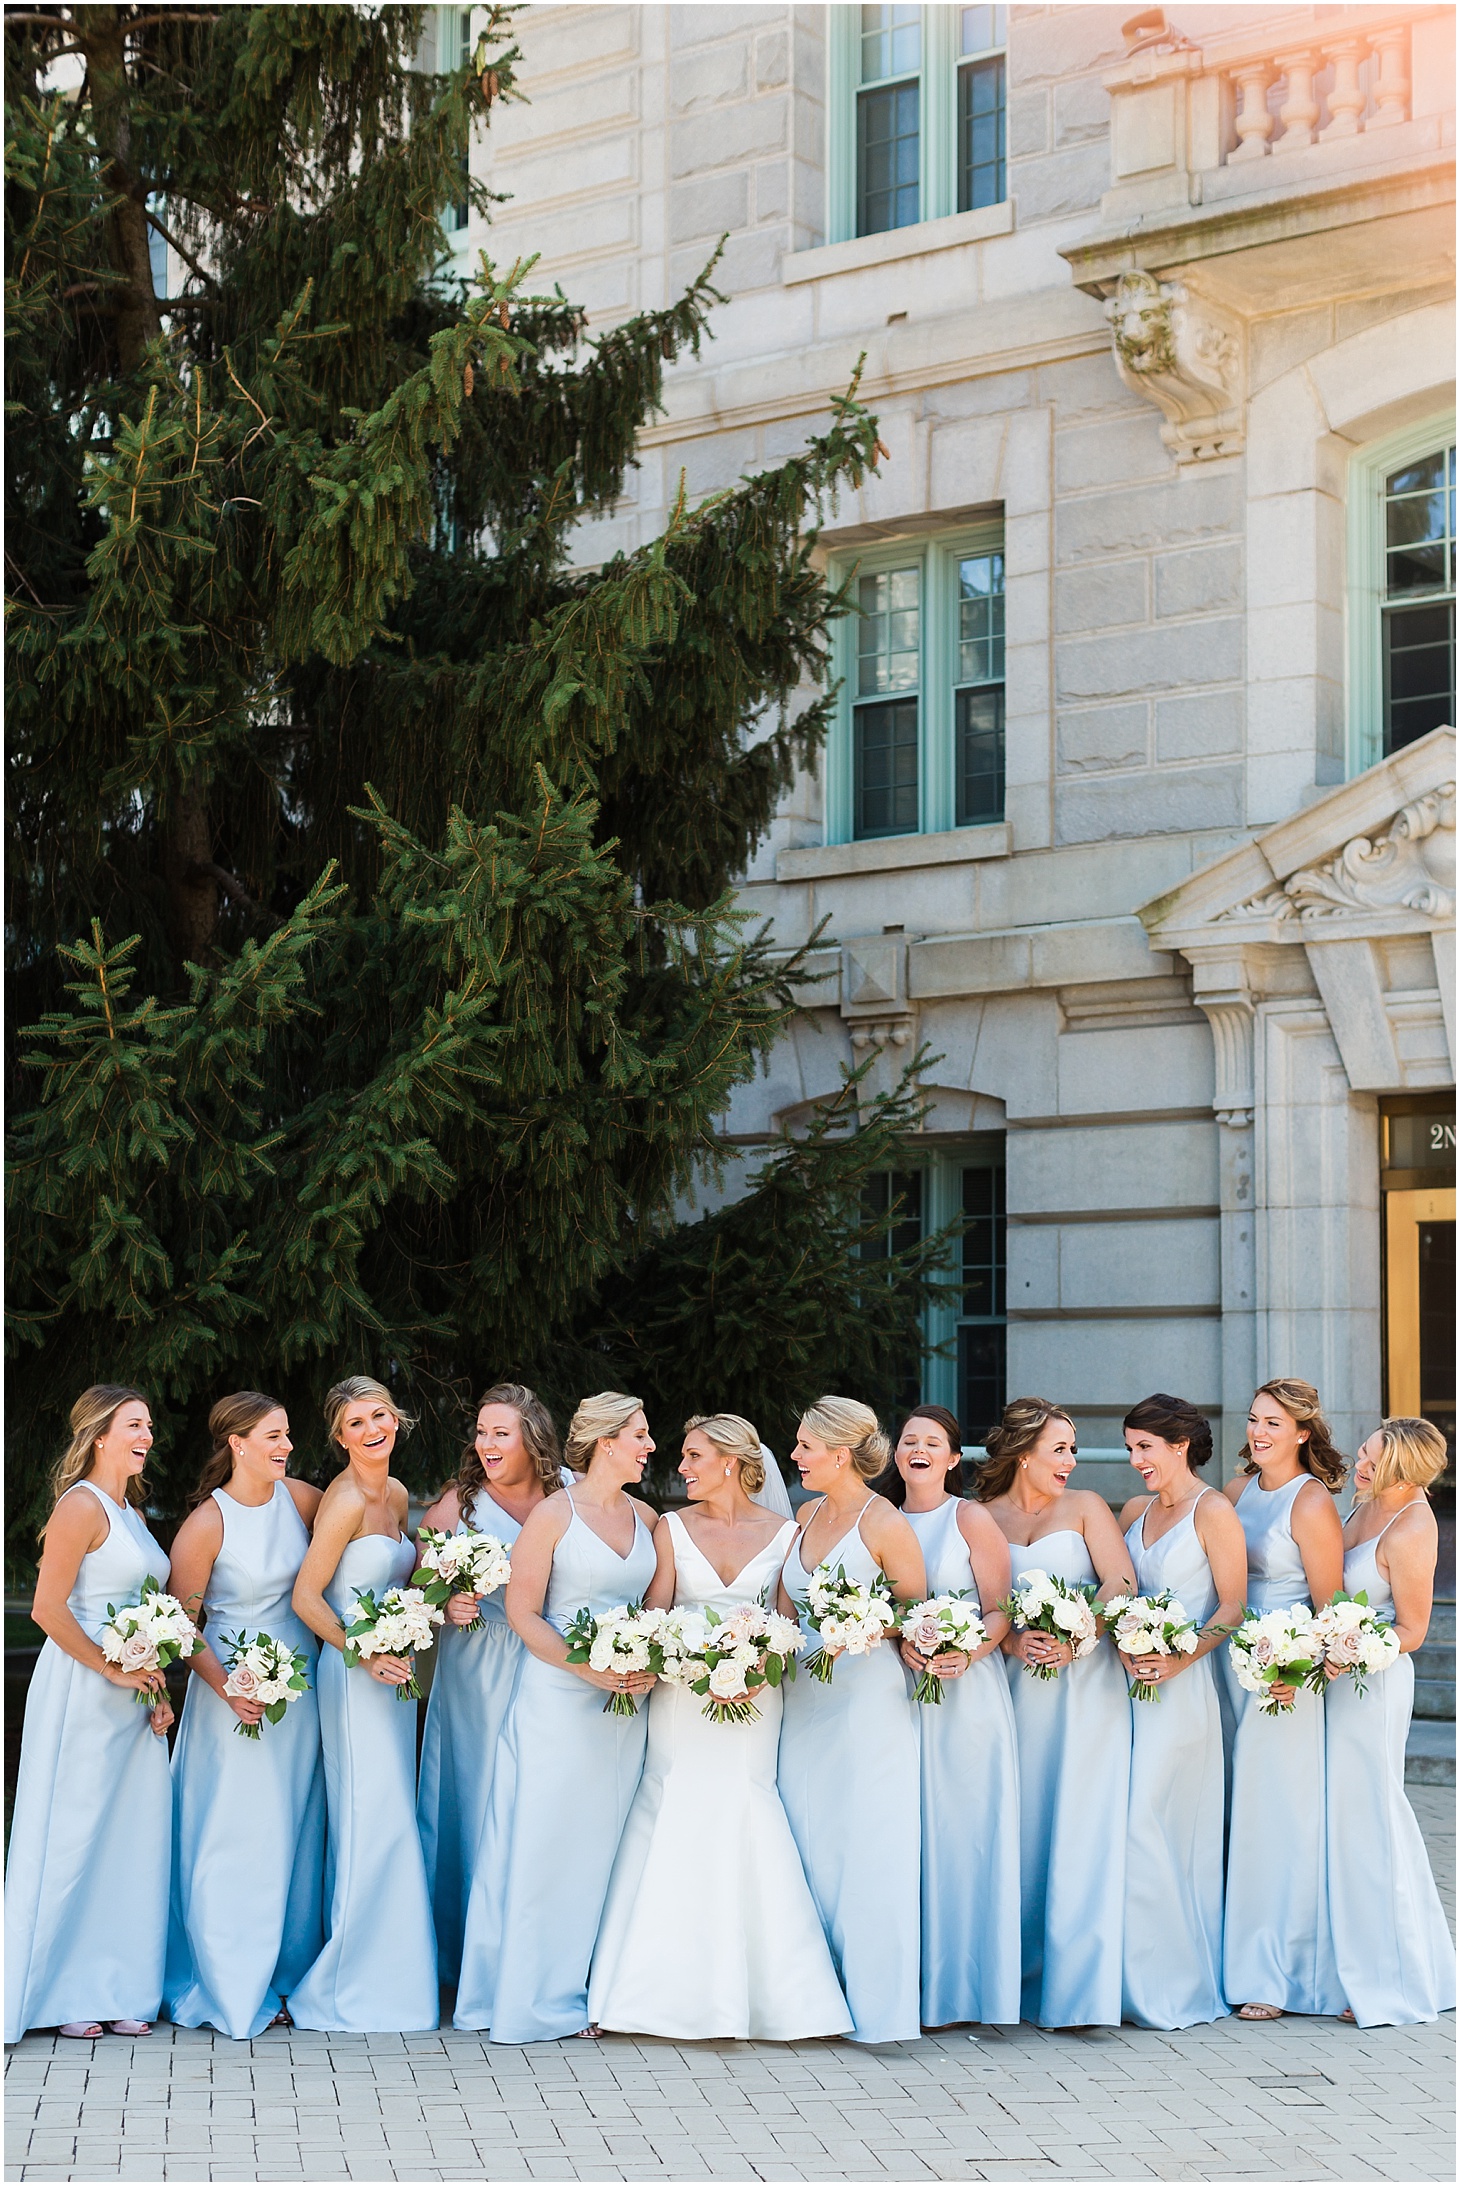 Bridal Party at US Naval Academy Chapel | Southern Magnolia Wedding at the Naval Academy and Gibson Island Club | Sarah Bradshaw Photography